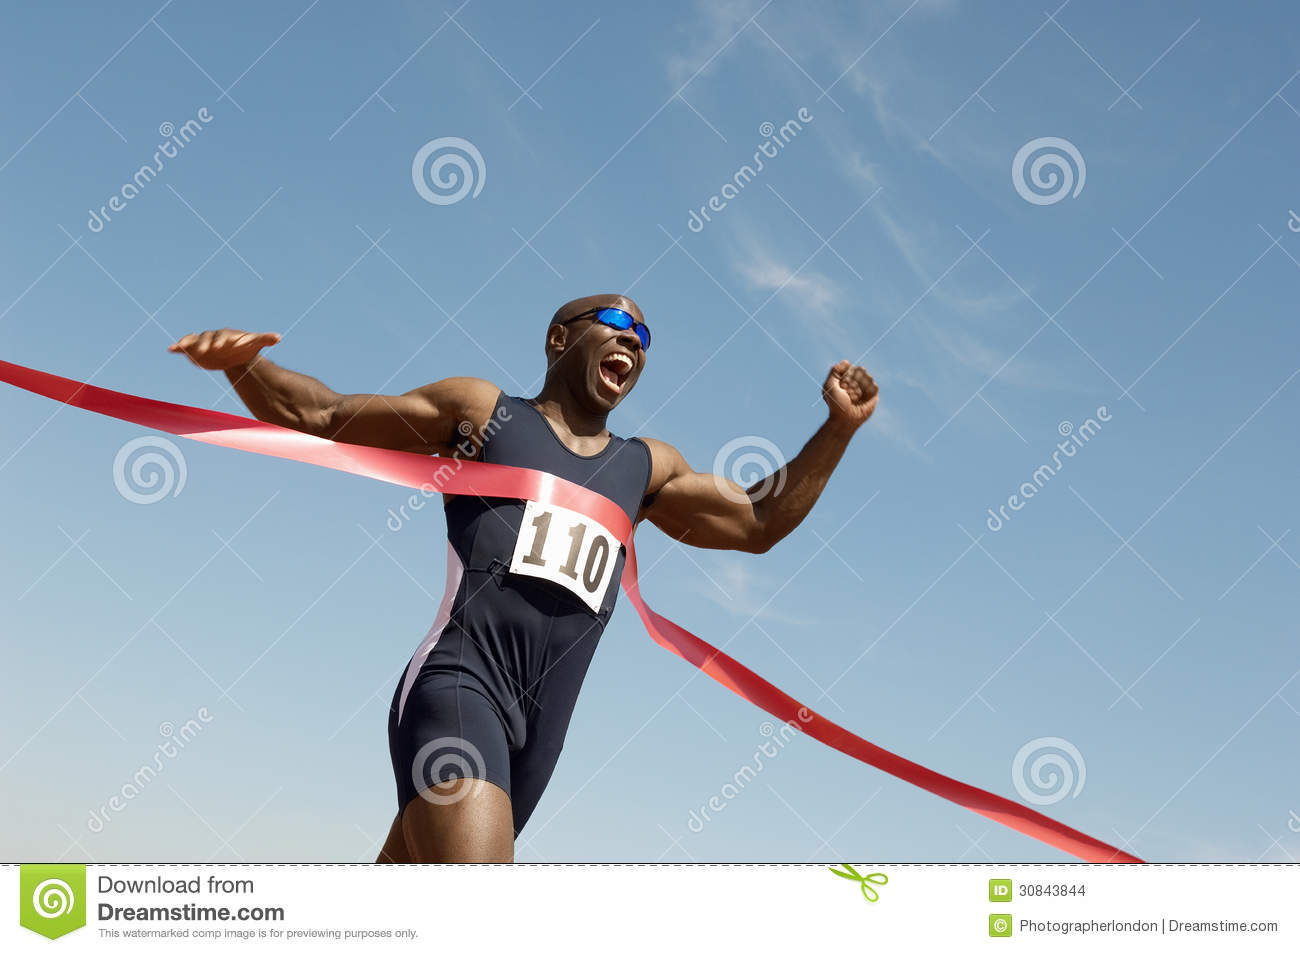 male-runner-winning-race-low-angle-view-african-american-against-blue-sky-30843844.jpg